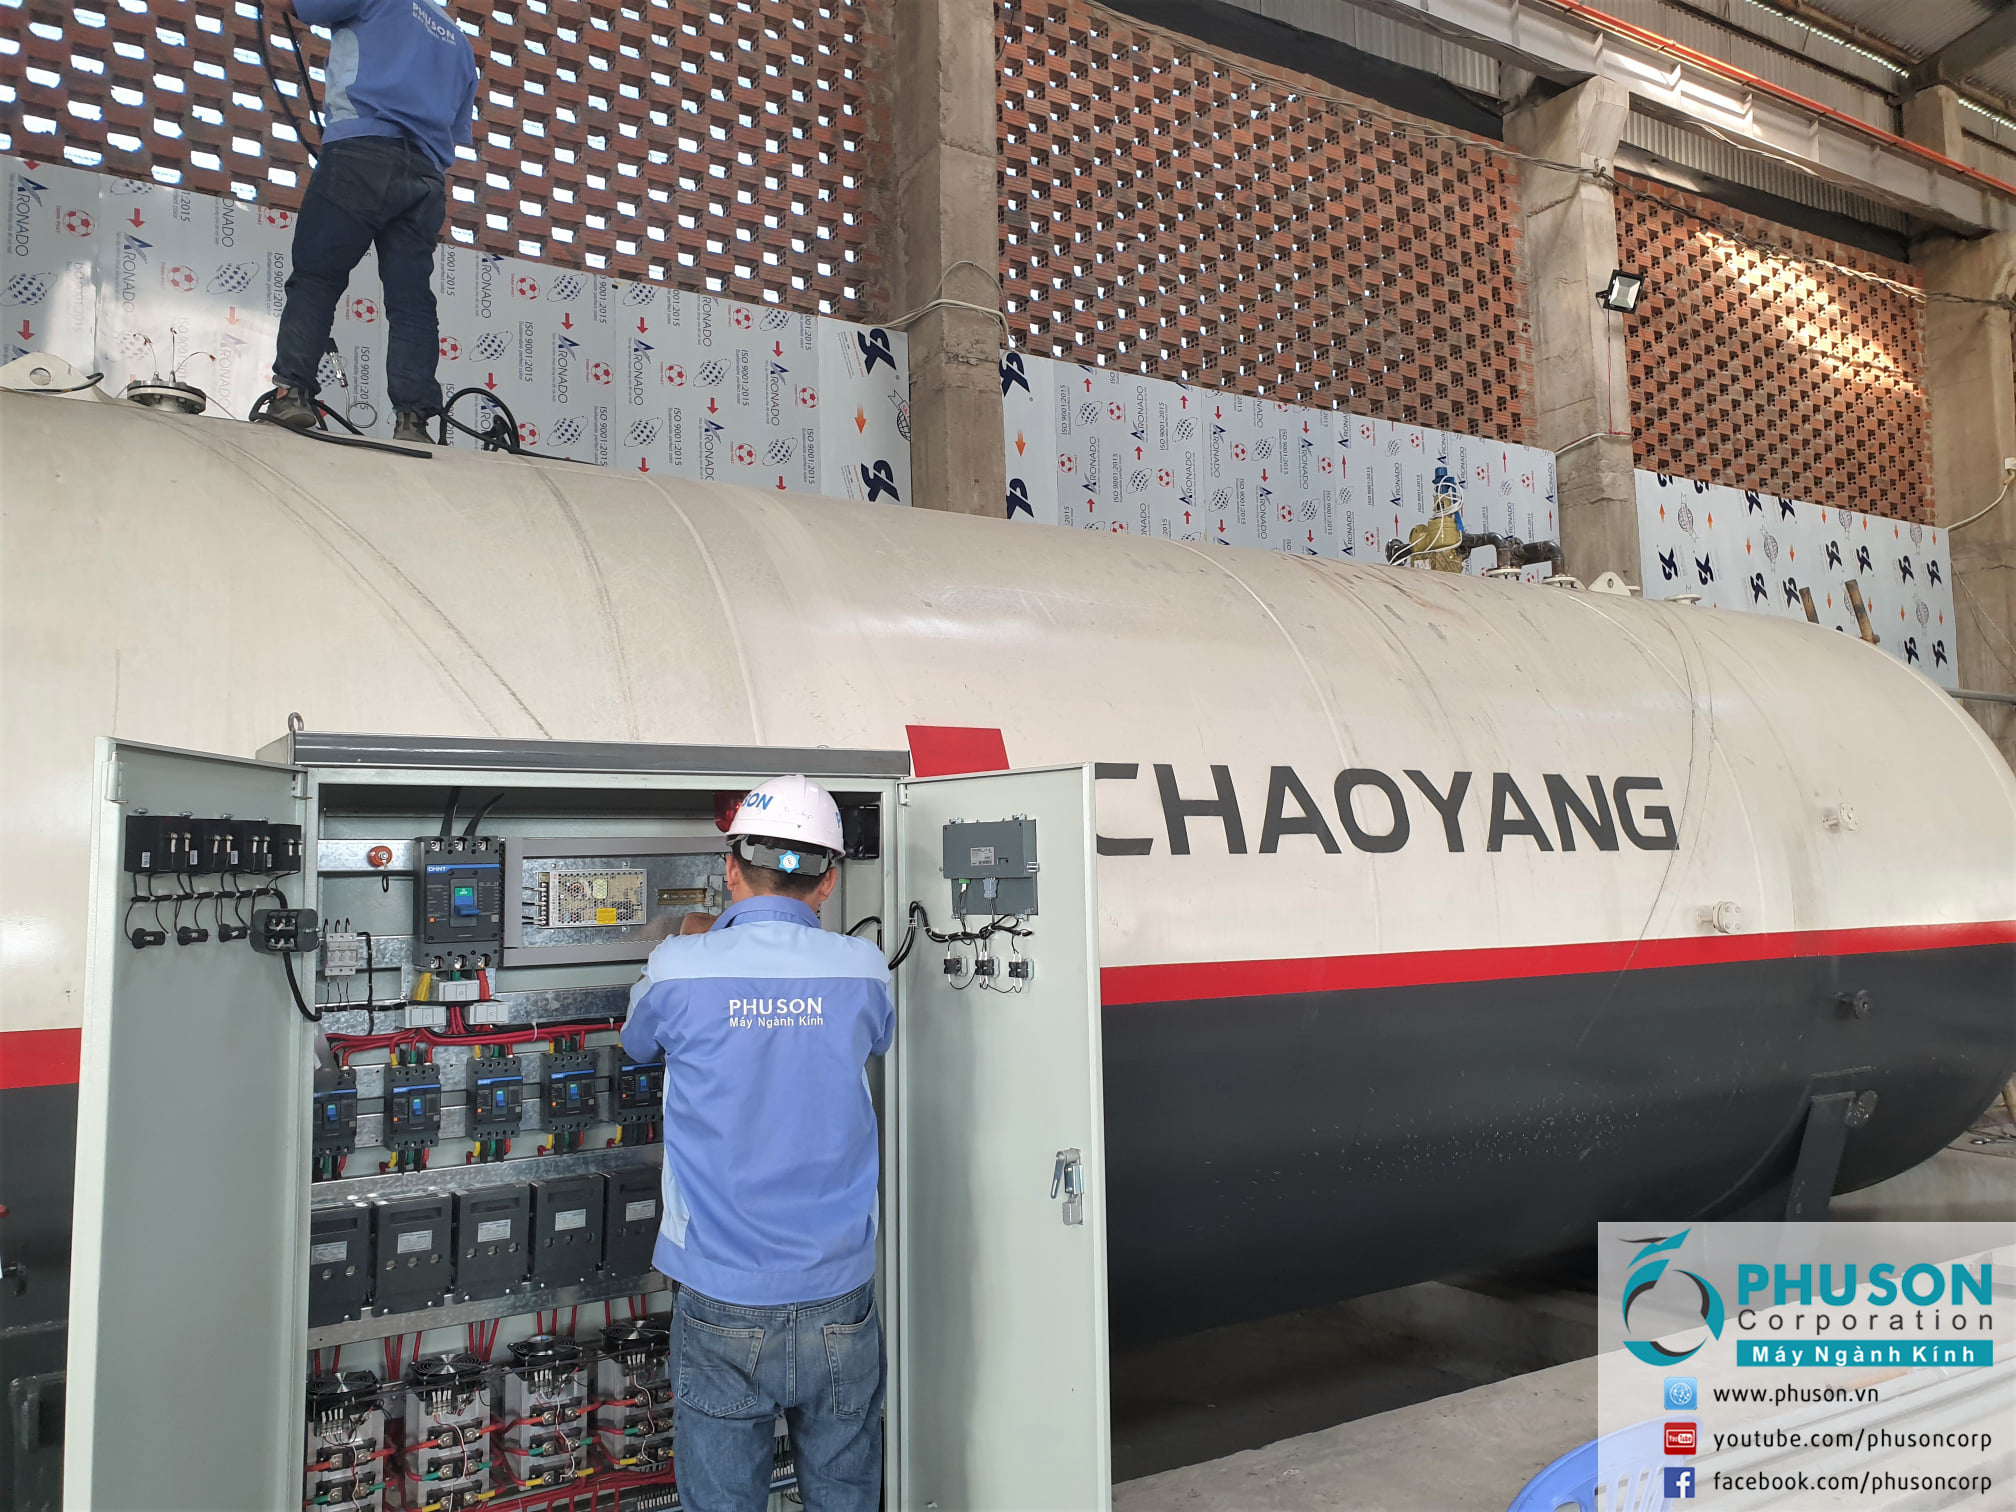 The installation of CHAOYANG large-sized autoclave at HUY HOANG GLASS factory